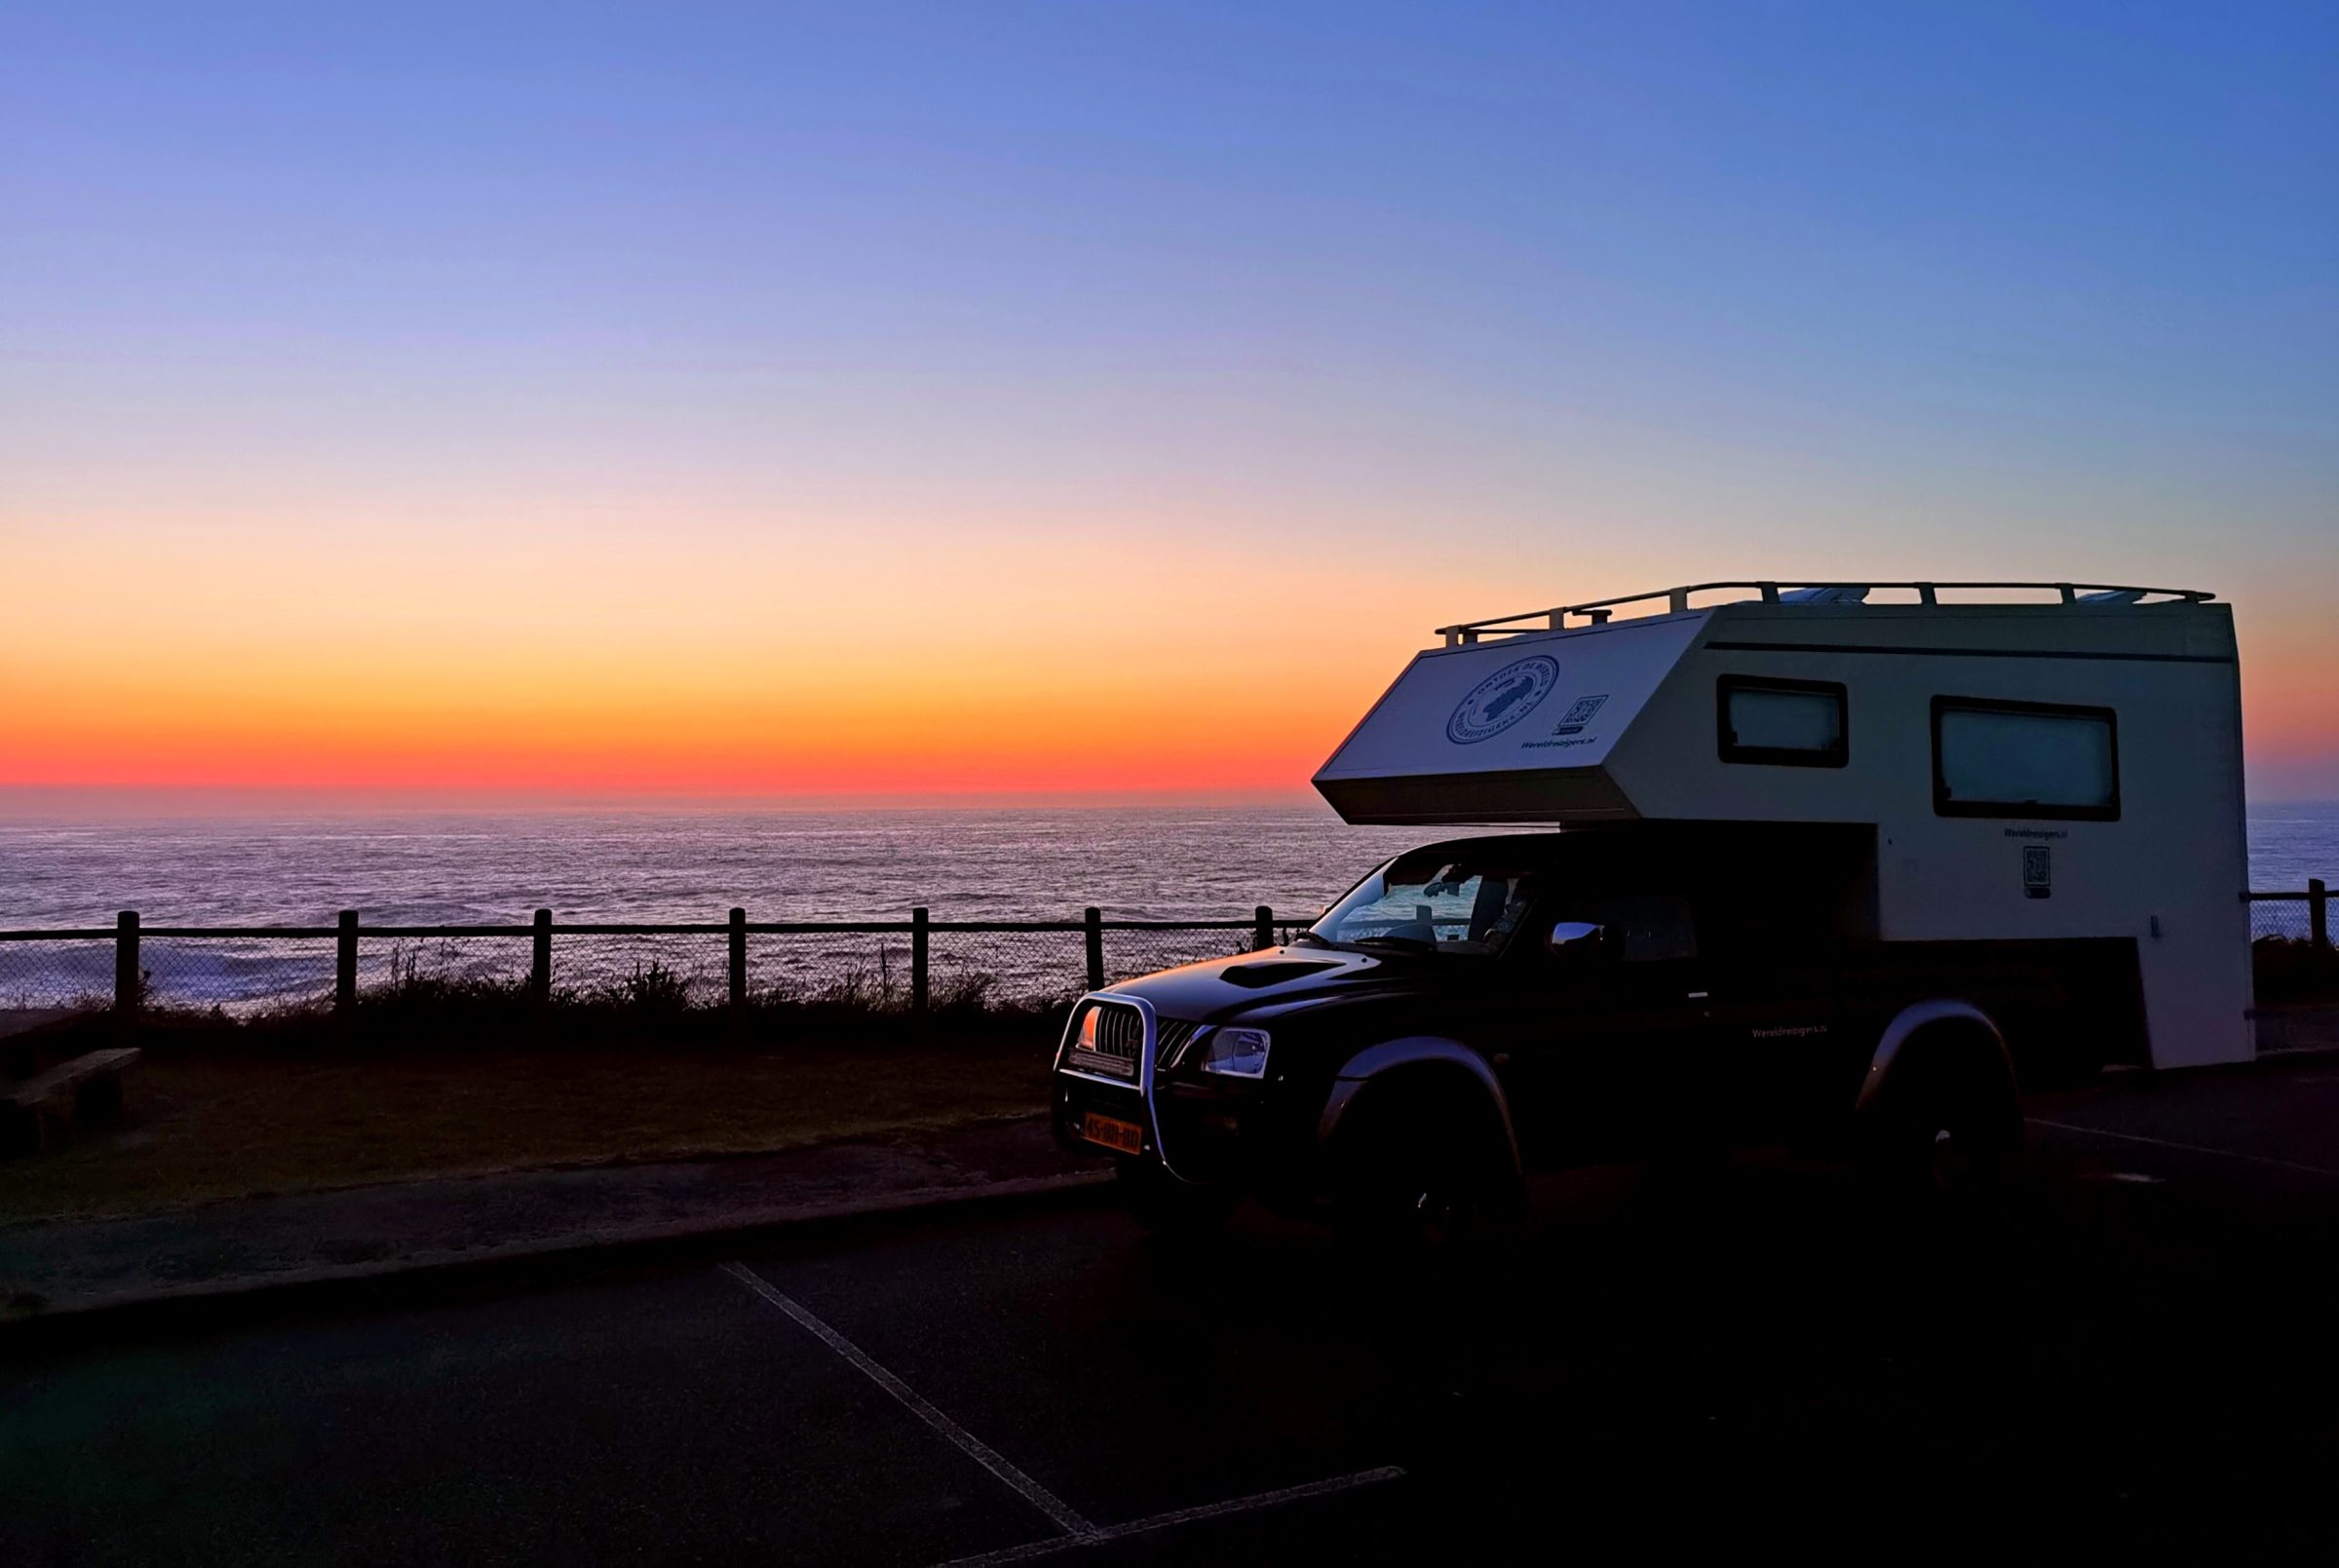 Vild campingplads | Boiler Bay State Scenic Viewpoint, Oregon